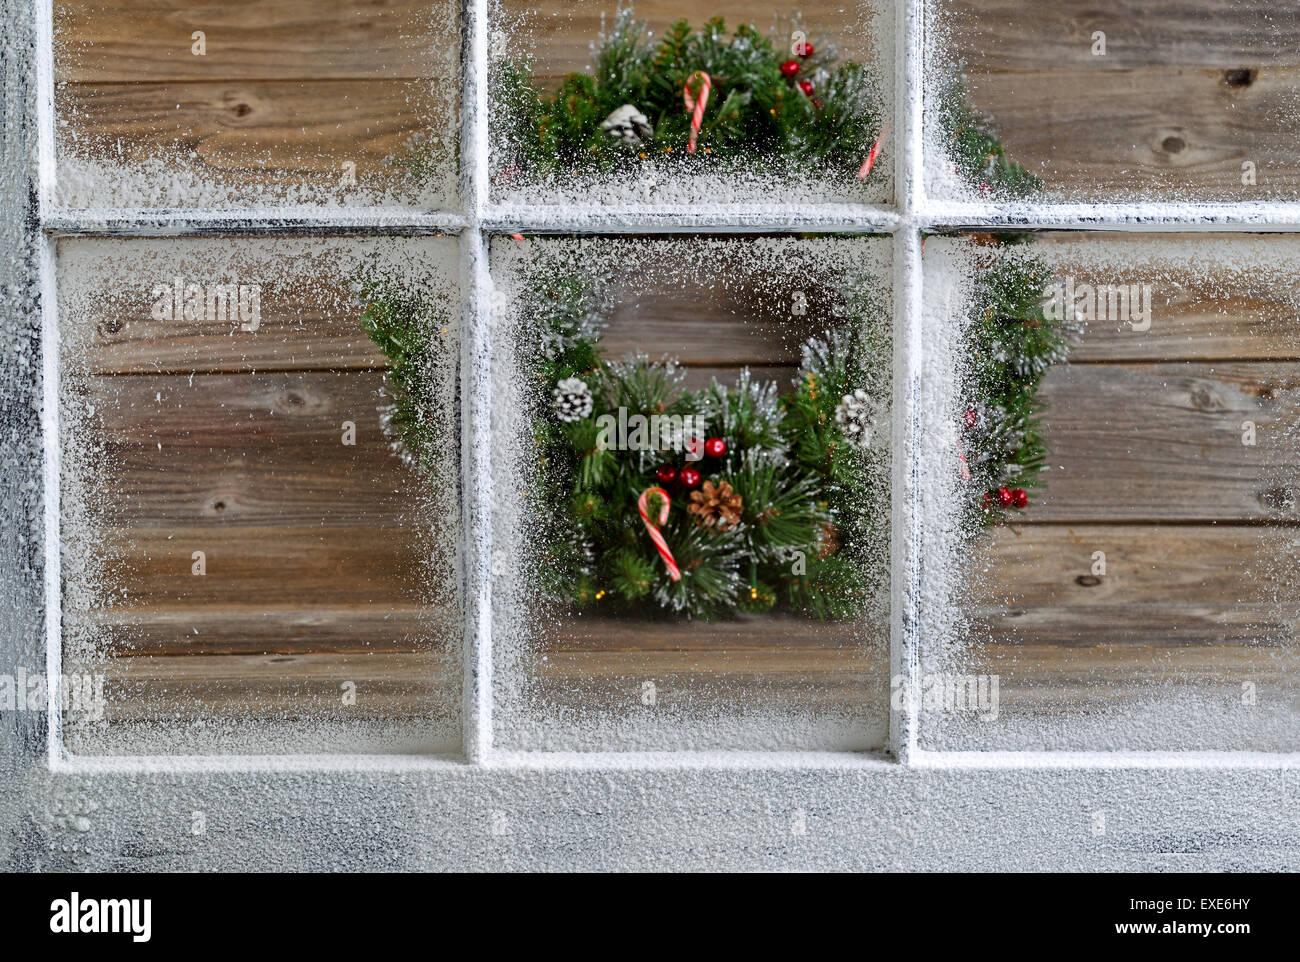 Snow covered window with decorative Christmas wreath on rustic wooden boards in background. Focus on window glass and sills. Stock Photo